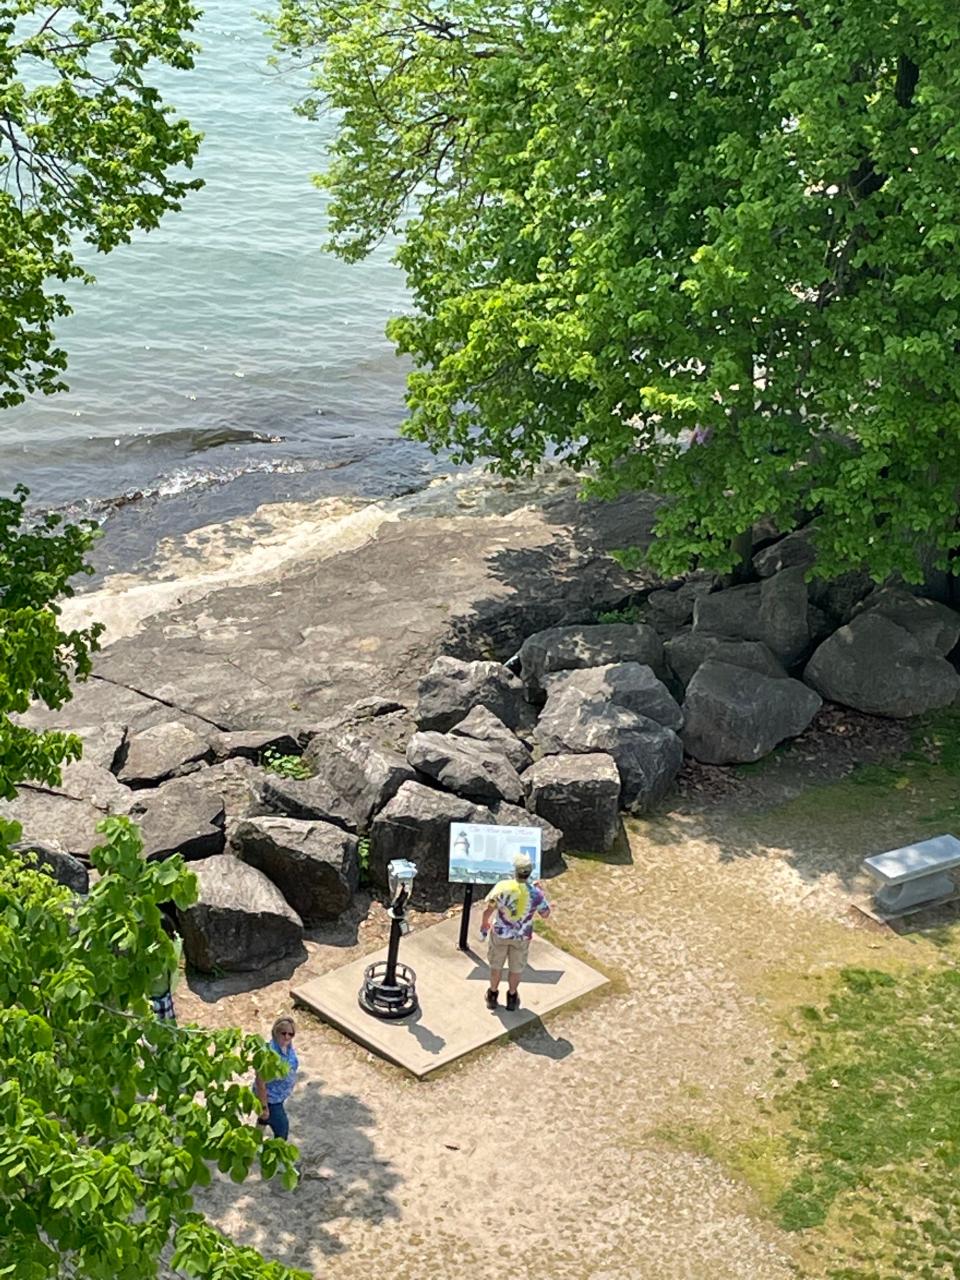 A visitor enjoys the view of Lake Erie from the shore at the base of the lighthouse.